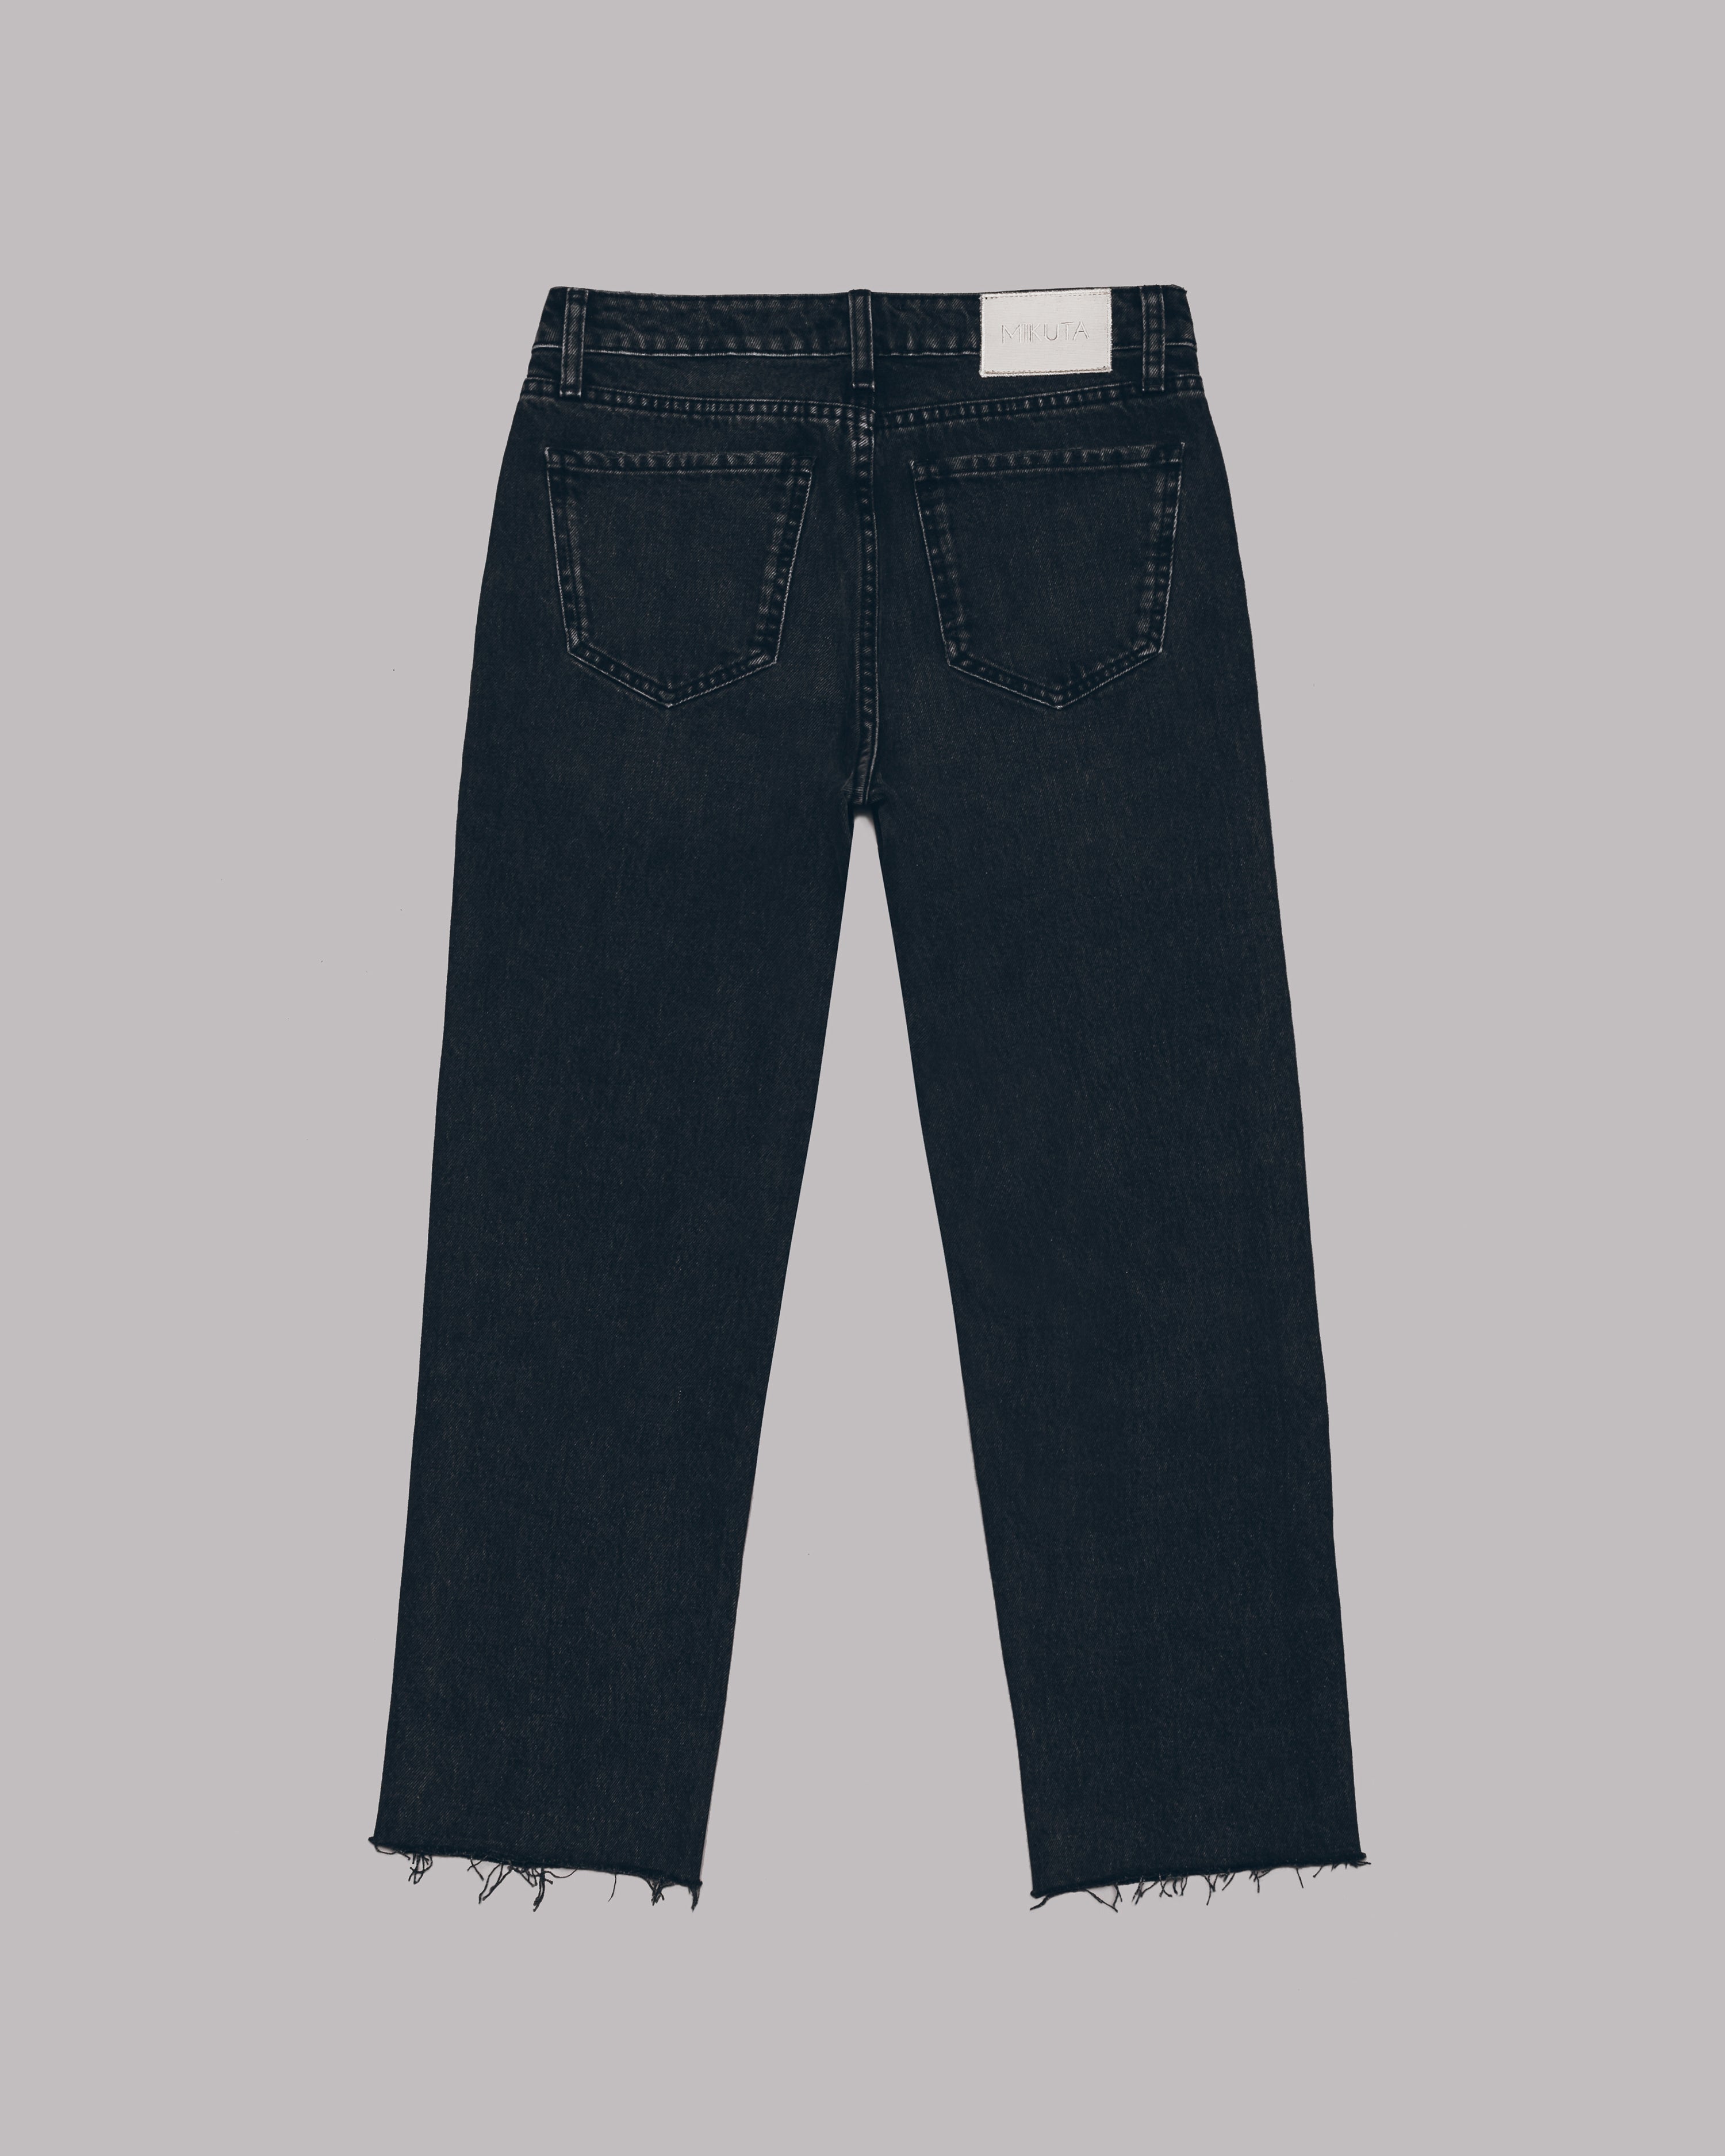 The Black Cropped Straight Jeans